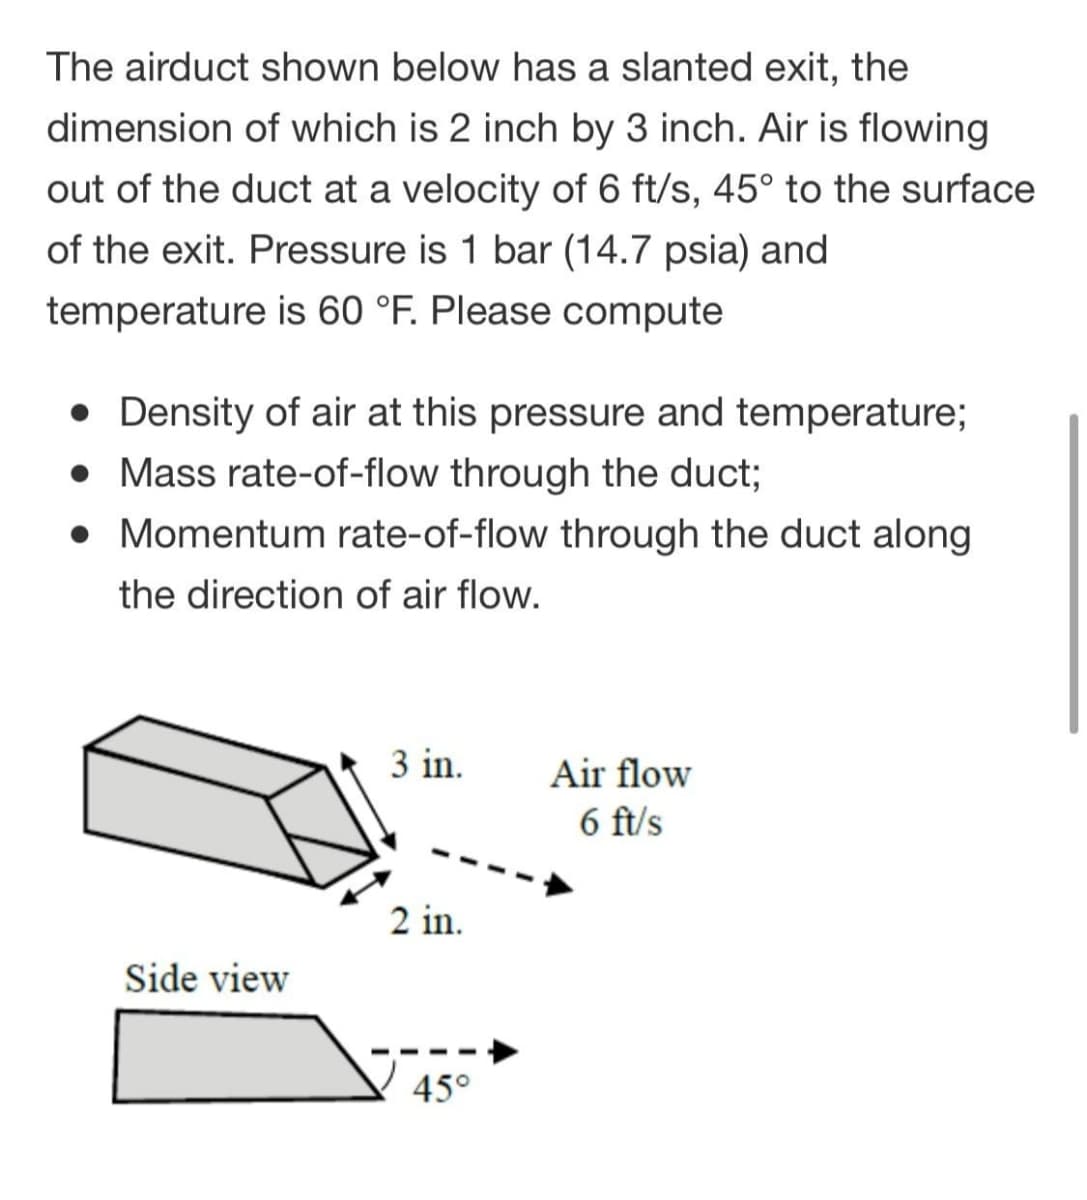 The airduct shown below has a slanted exit, the
dimension of which is 2 inch by 3 inch. Air is flowing
out of the duct at a velocity of 6 ft/s, 45° to the surface
of the exit. Pressure is 1 bar (14.7 psia) and
temperature is 60 °F. Please compute
• Density of air at this pressure and temperature;
• Mass rate-of-flow through the duct;
• Momentum rate-of-flow through the duct along
the direction of air flow.
3 in.
Air flow
6 ft/s
2 in.
Side view
45°
